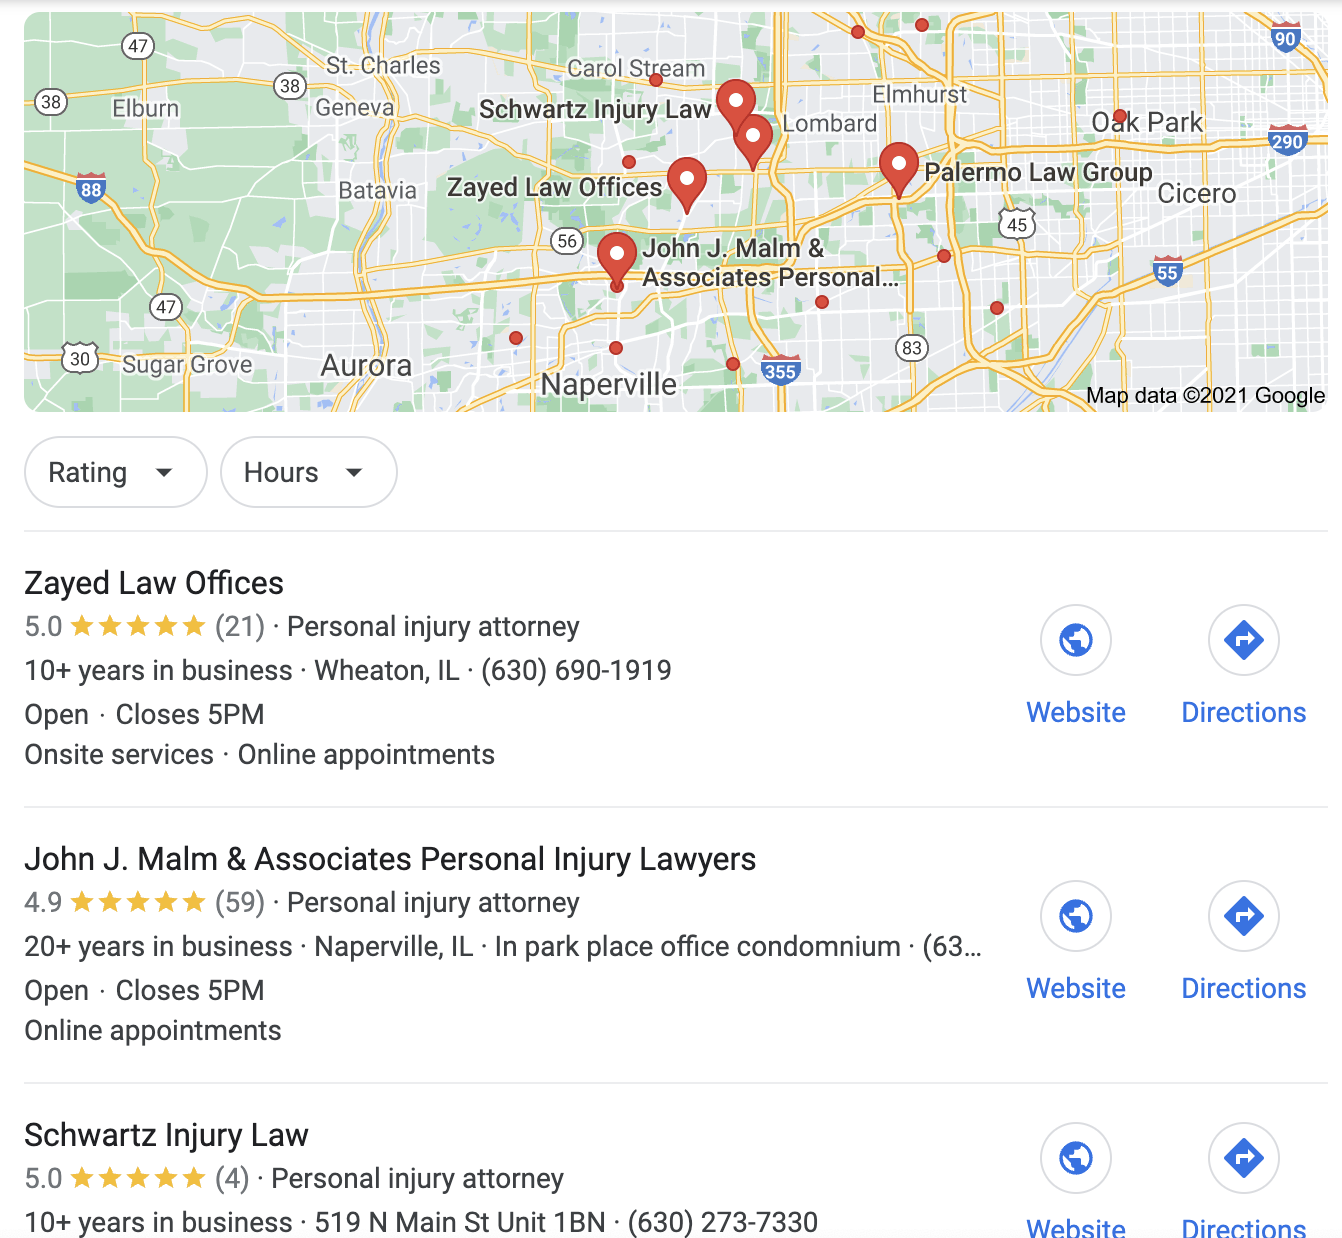 Local Results powered by Google My Business